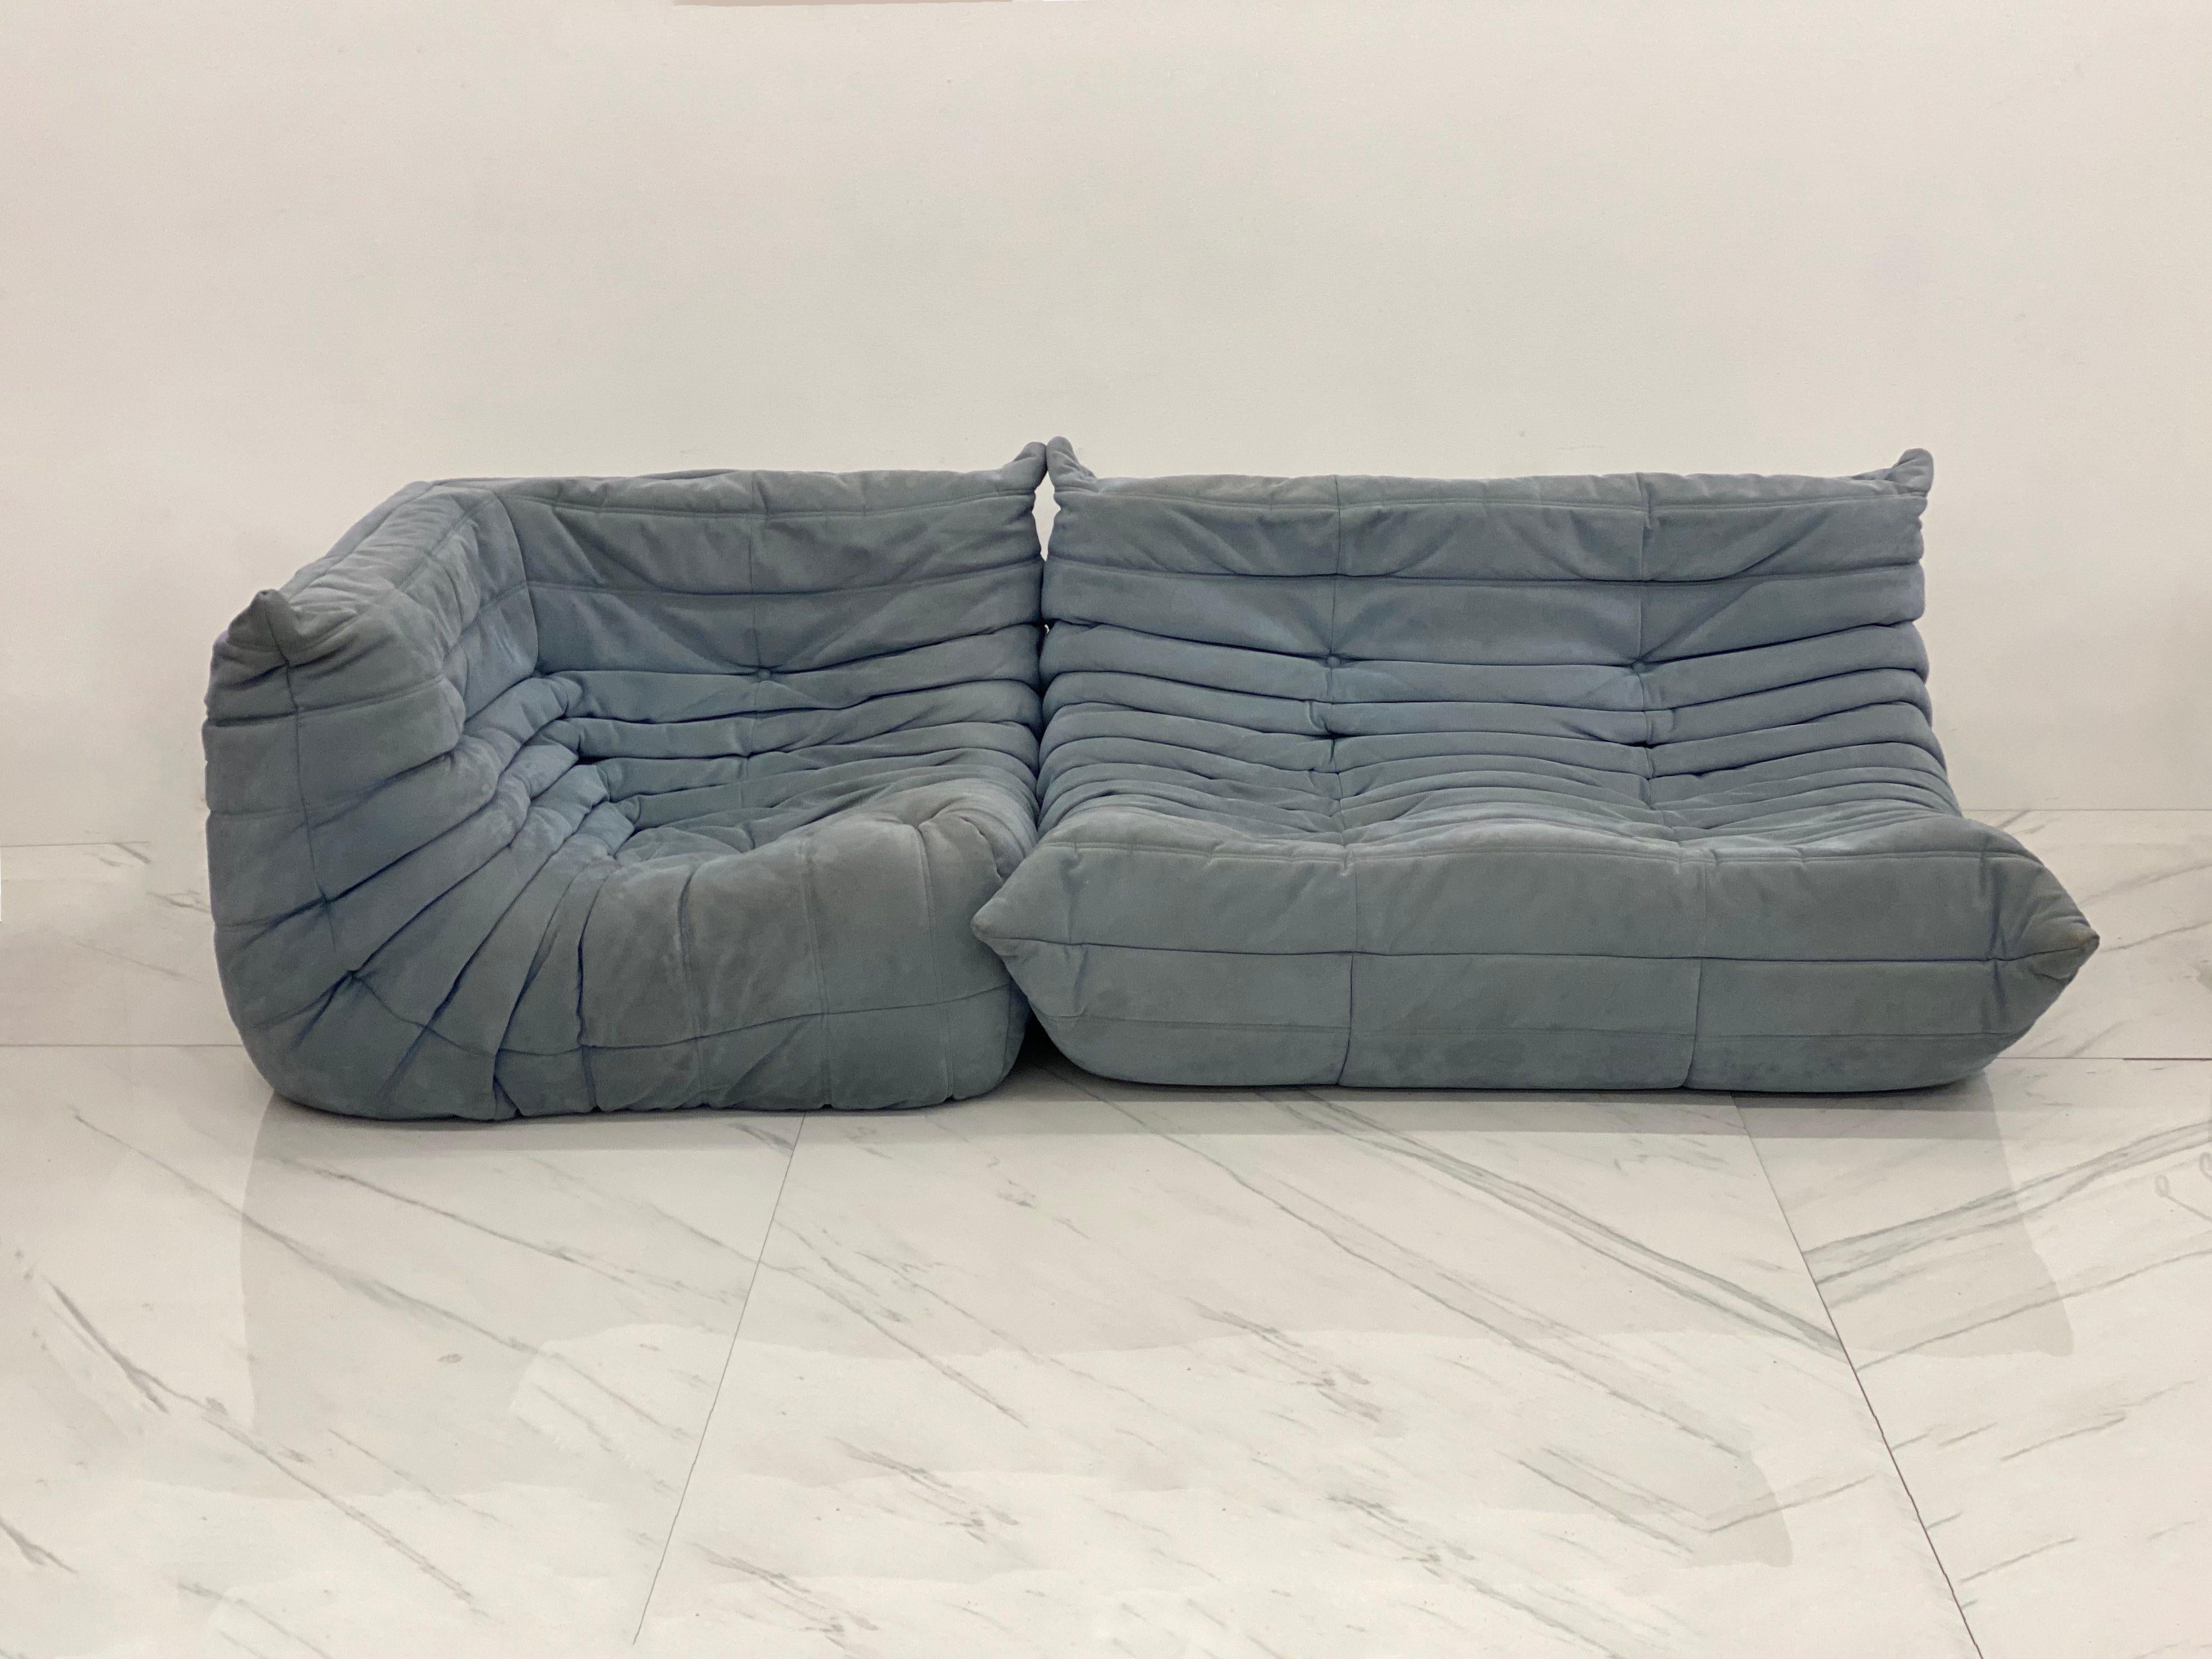 This incredible Togo sectional sofa in beautiful baby blue Alcantara suede was designed by Michel Ducaroy in 1973 for Ligne Roset, France. Signed with Ligne Roset labels. Timeless design make this Togo loveseat and corner seat combo by Michel